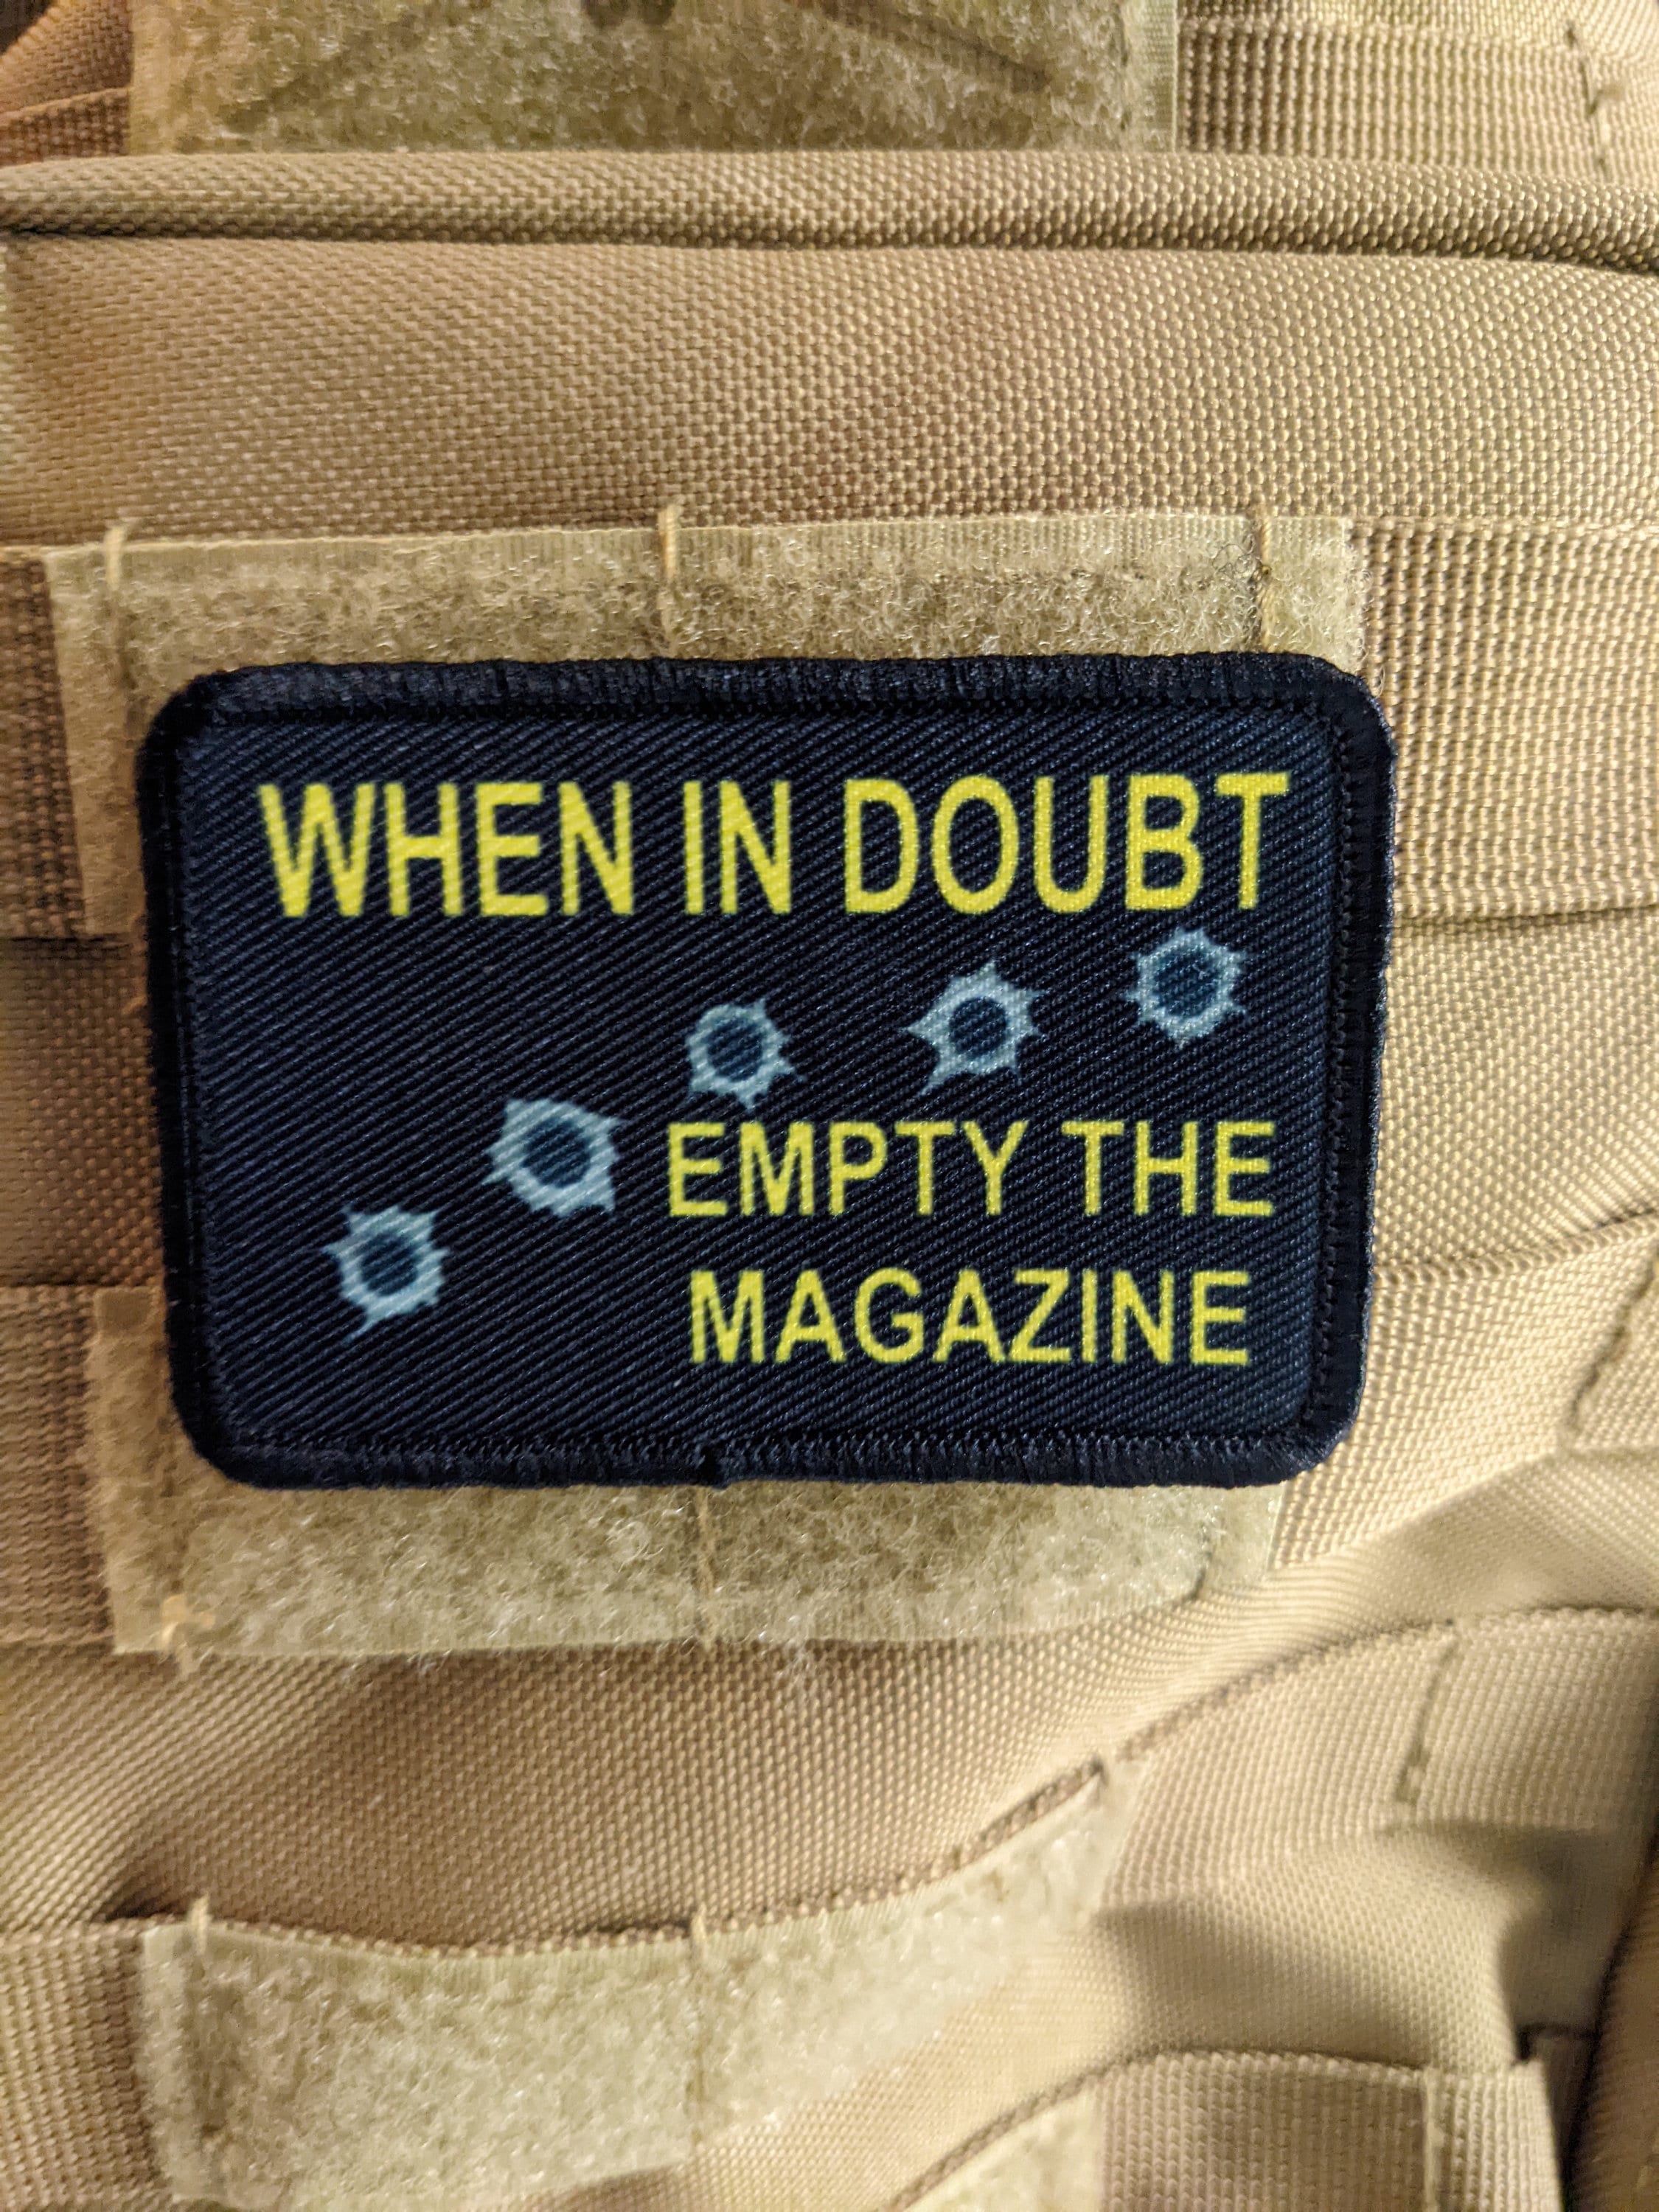 Misfits Patch Multicam OCP - Funny Tactical Military Morale Embroidered  Patch Hook Fastener Backing